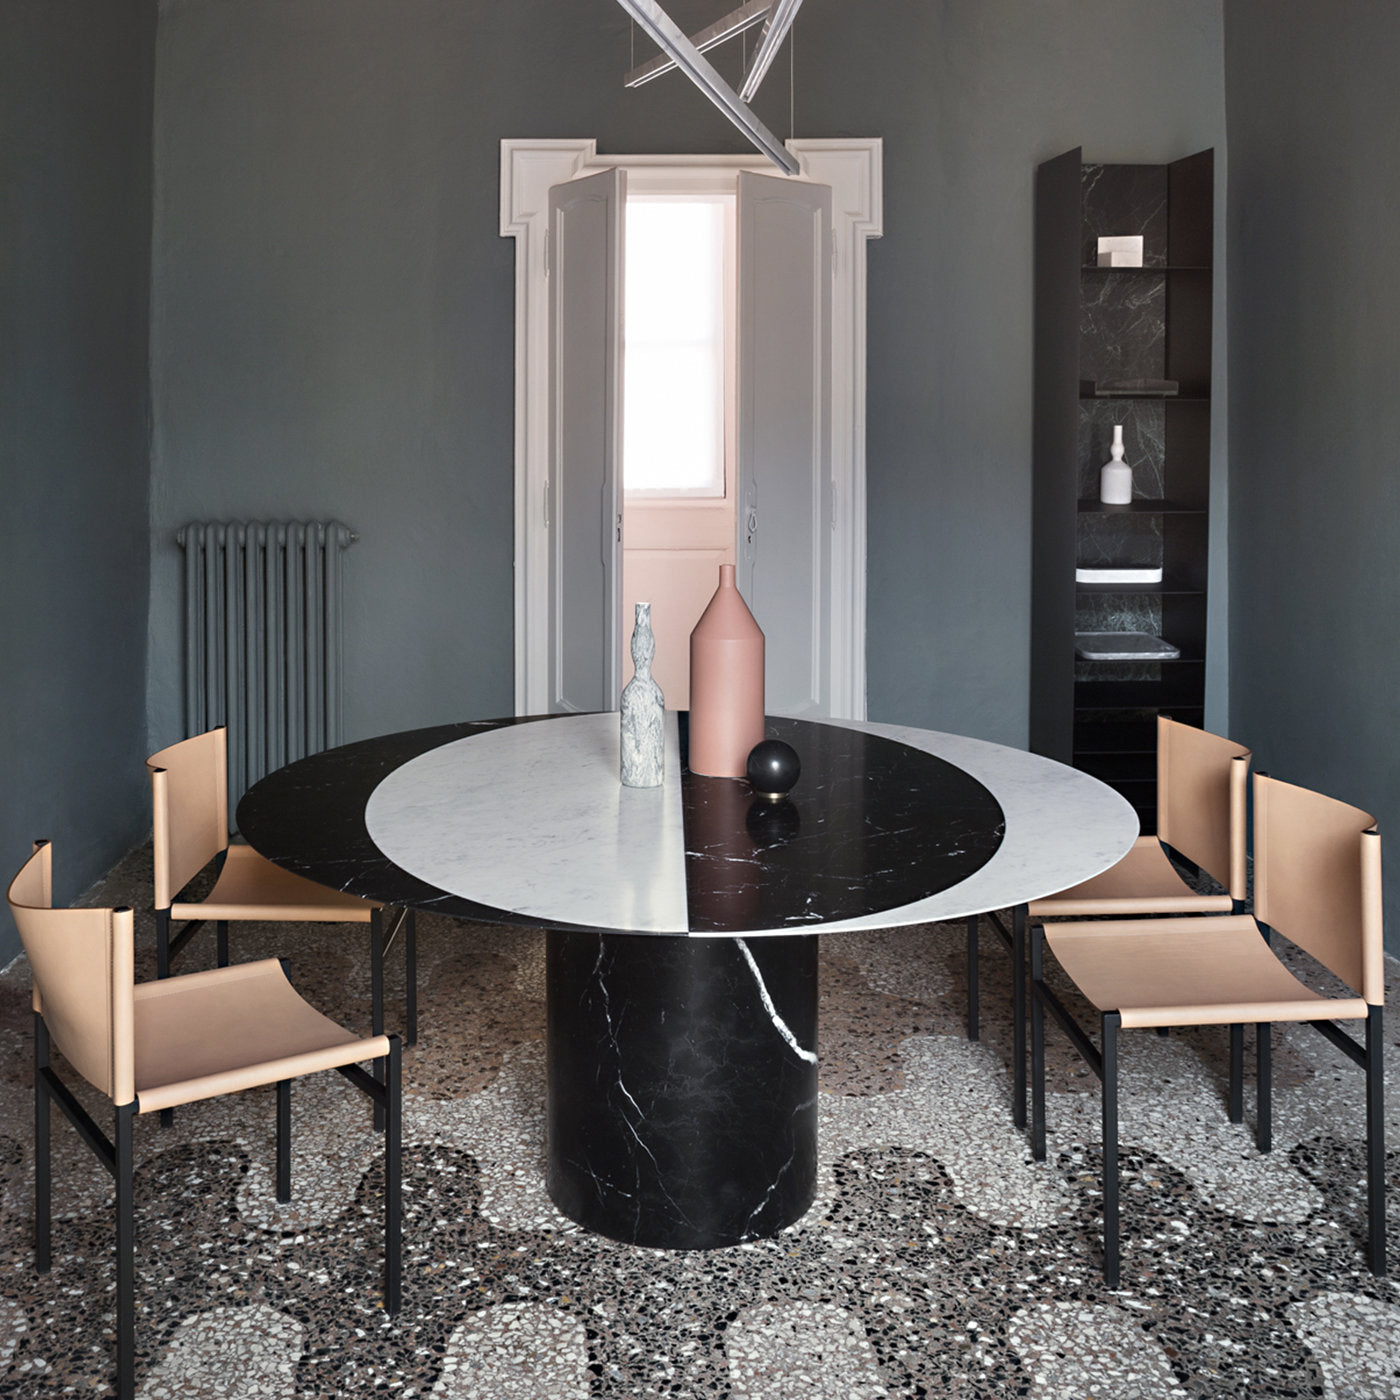 Proiezioni Round Black and White Marble Dining Table #1 by Elisa Ossino - Alternative view 3